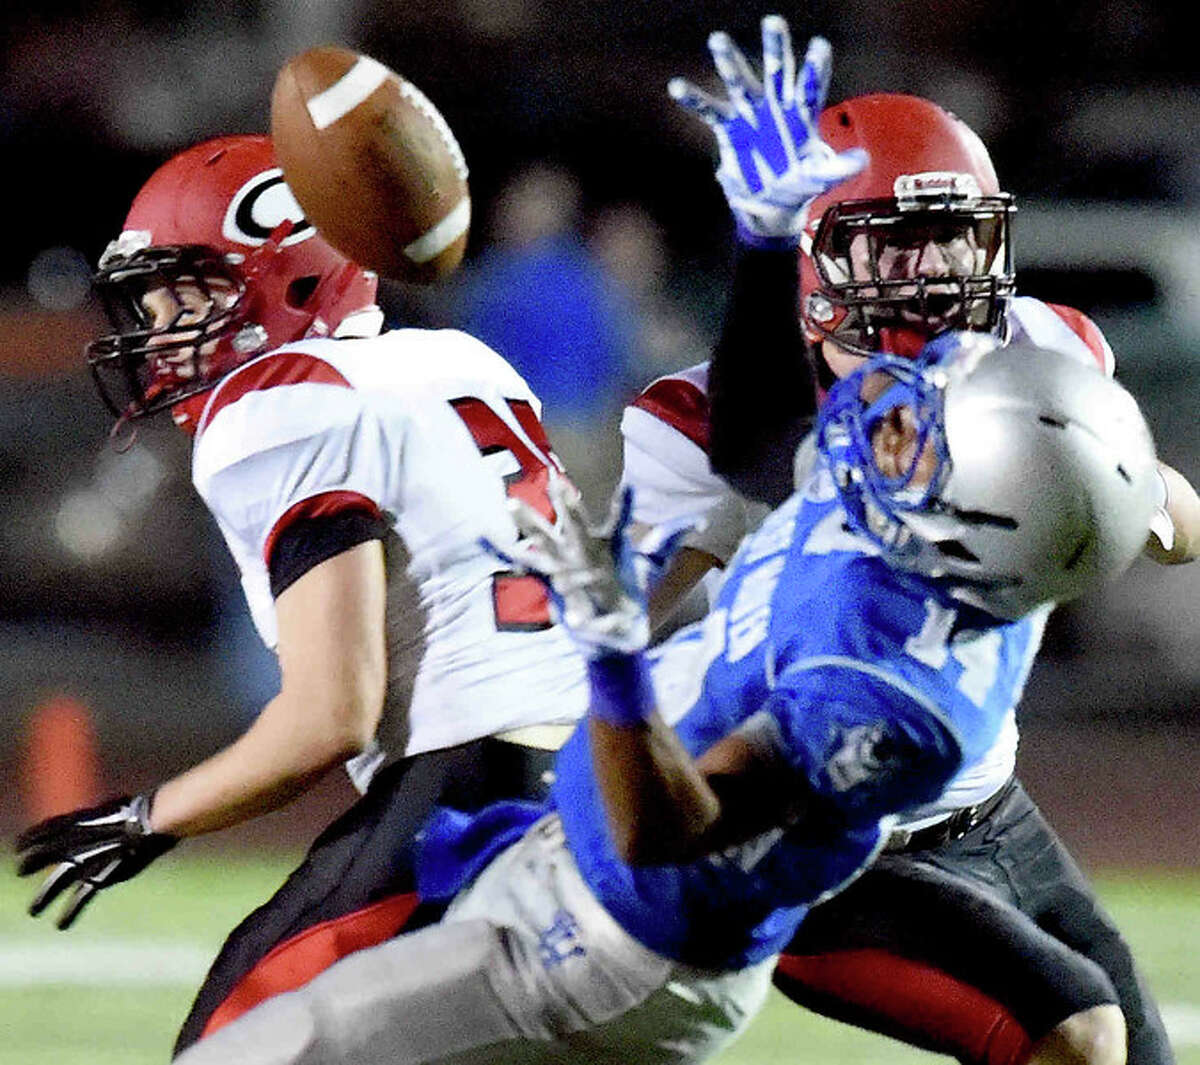 (Peter Hvizdak – New Haven Register) Zatrell Lyons of West Haven H.S. can’t hold onto the ball, center, as the pass play is broken up by Cheshire High School defensive backs Nate Hilburn, left, Brian Weyrauch during second quarter football action Friday (Photo Peter Hvizdak, Register)